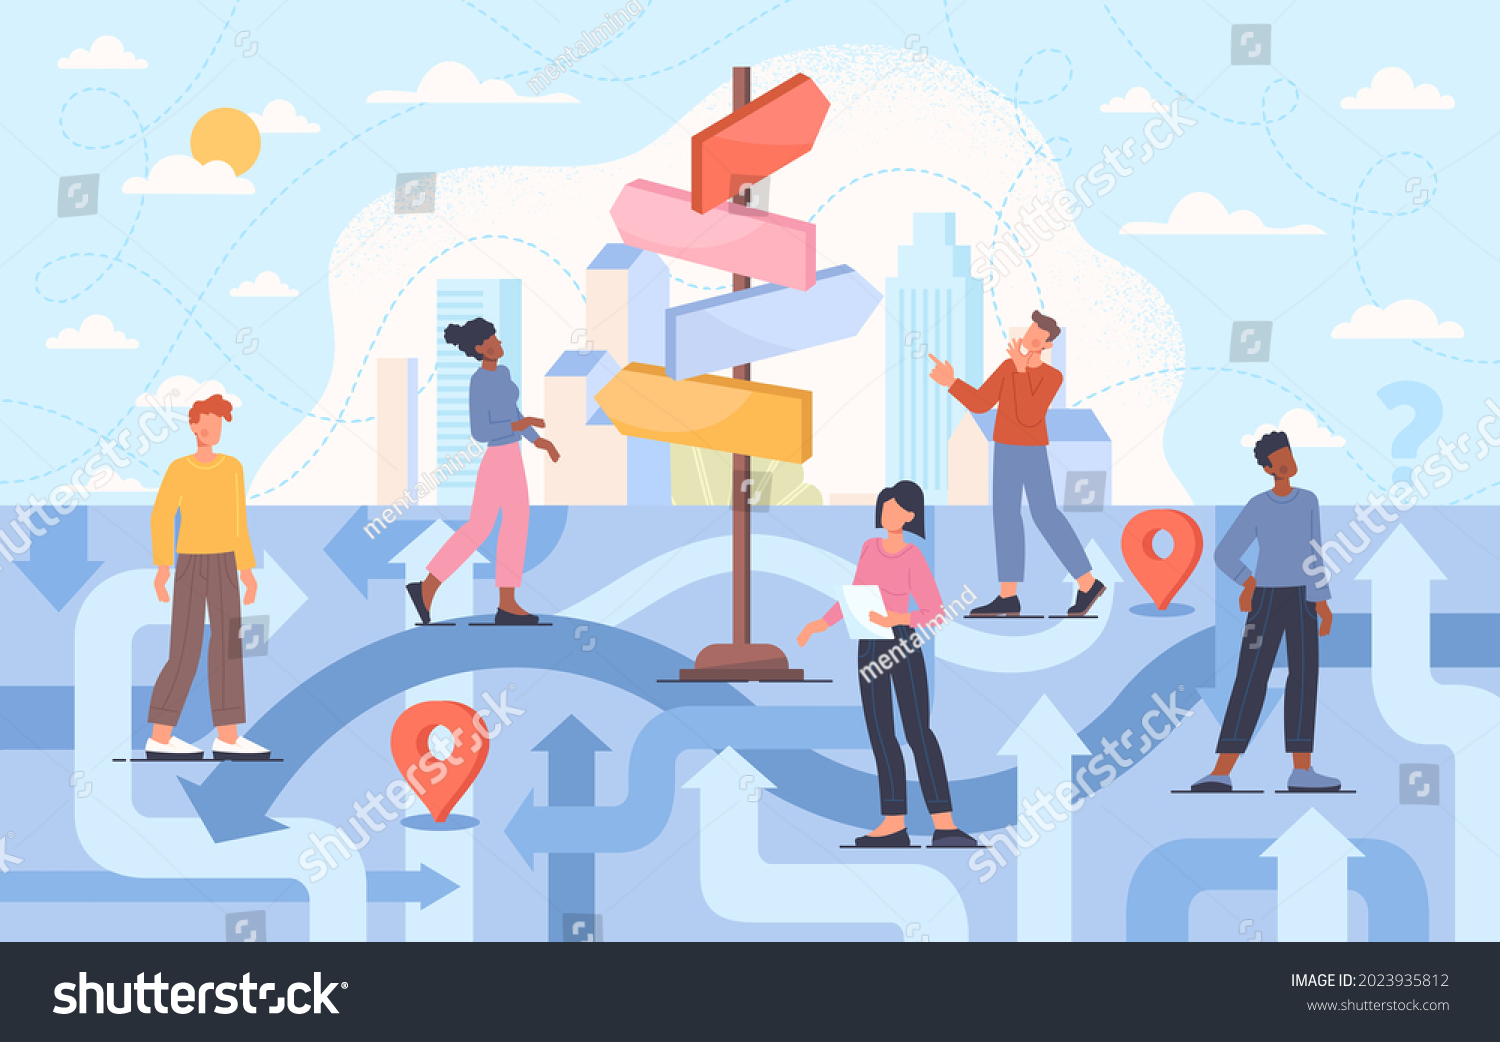 SVG of Young male and female characters are trying to find the right path direction and guide to destination. Different strategies for life choices and hardship solutions. Flat cartoon vector illustration svg